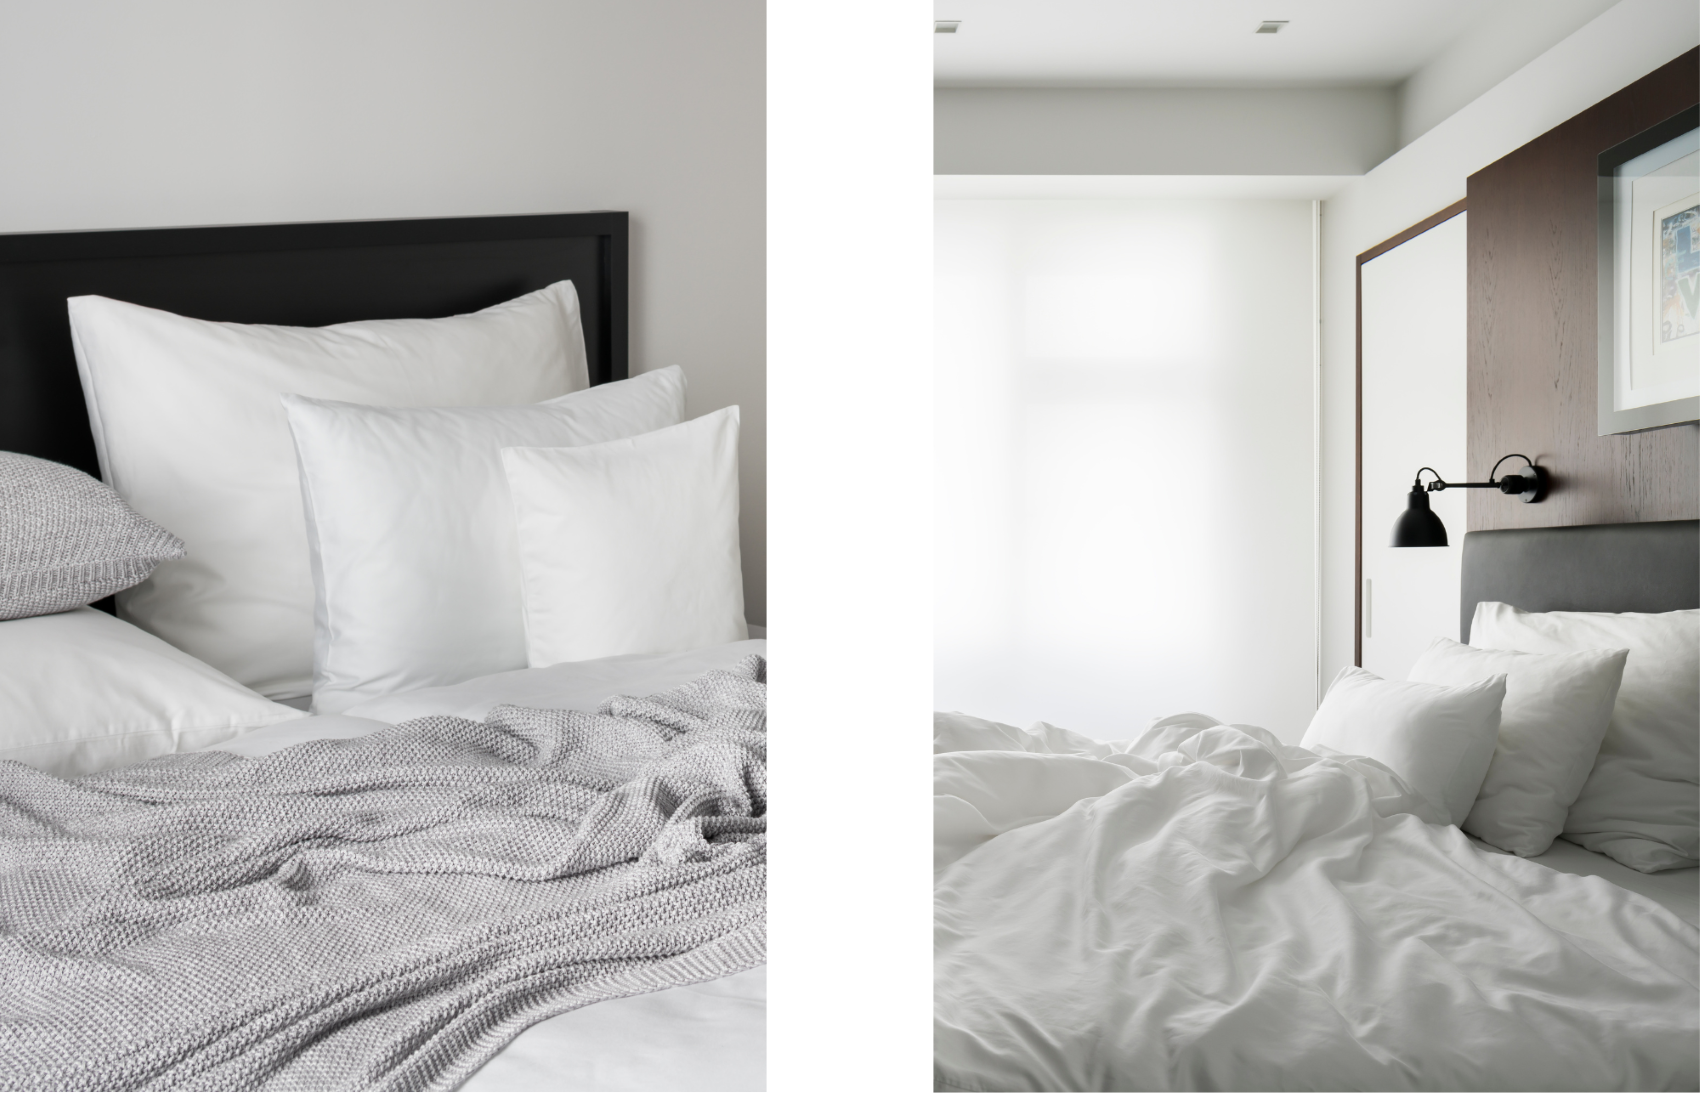 Caring for bed linen is easy, just follow a few simple rules.